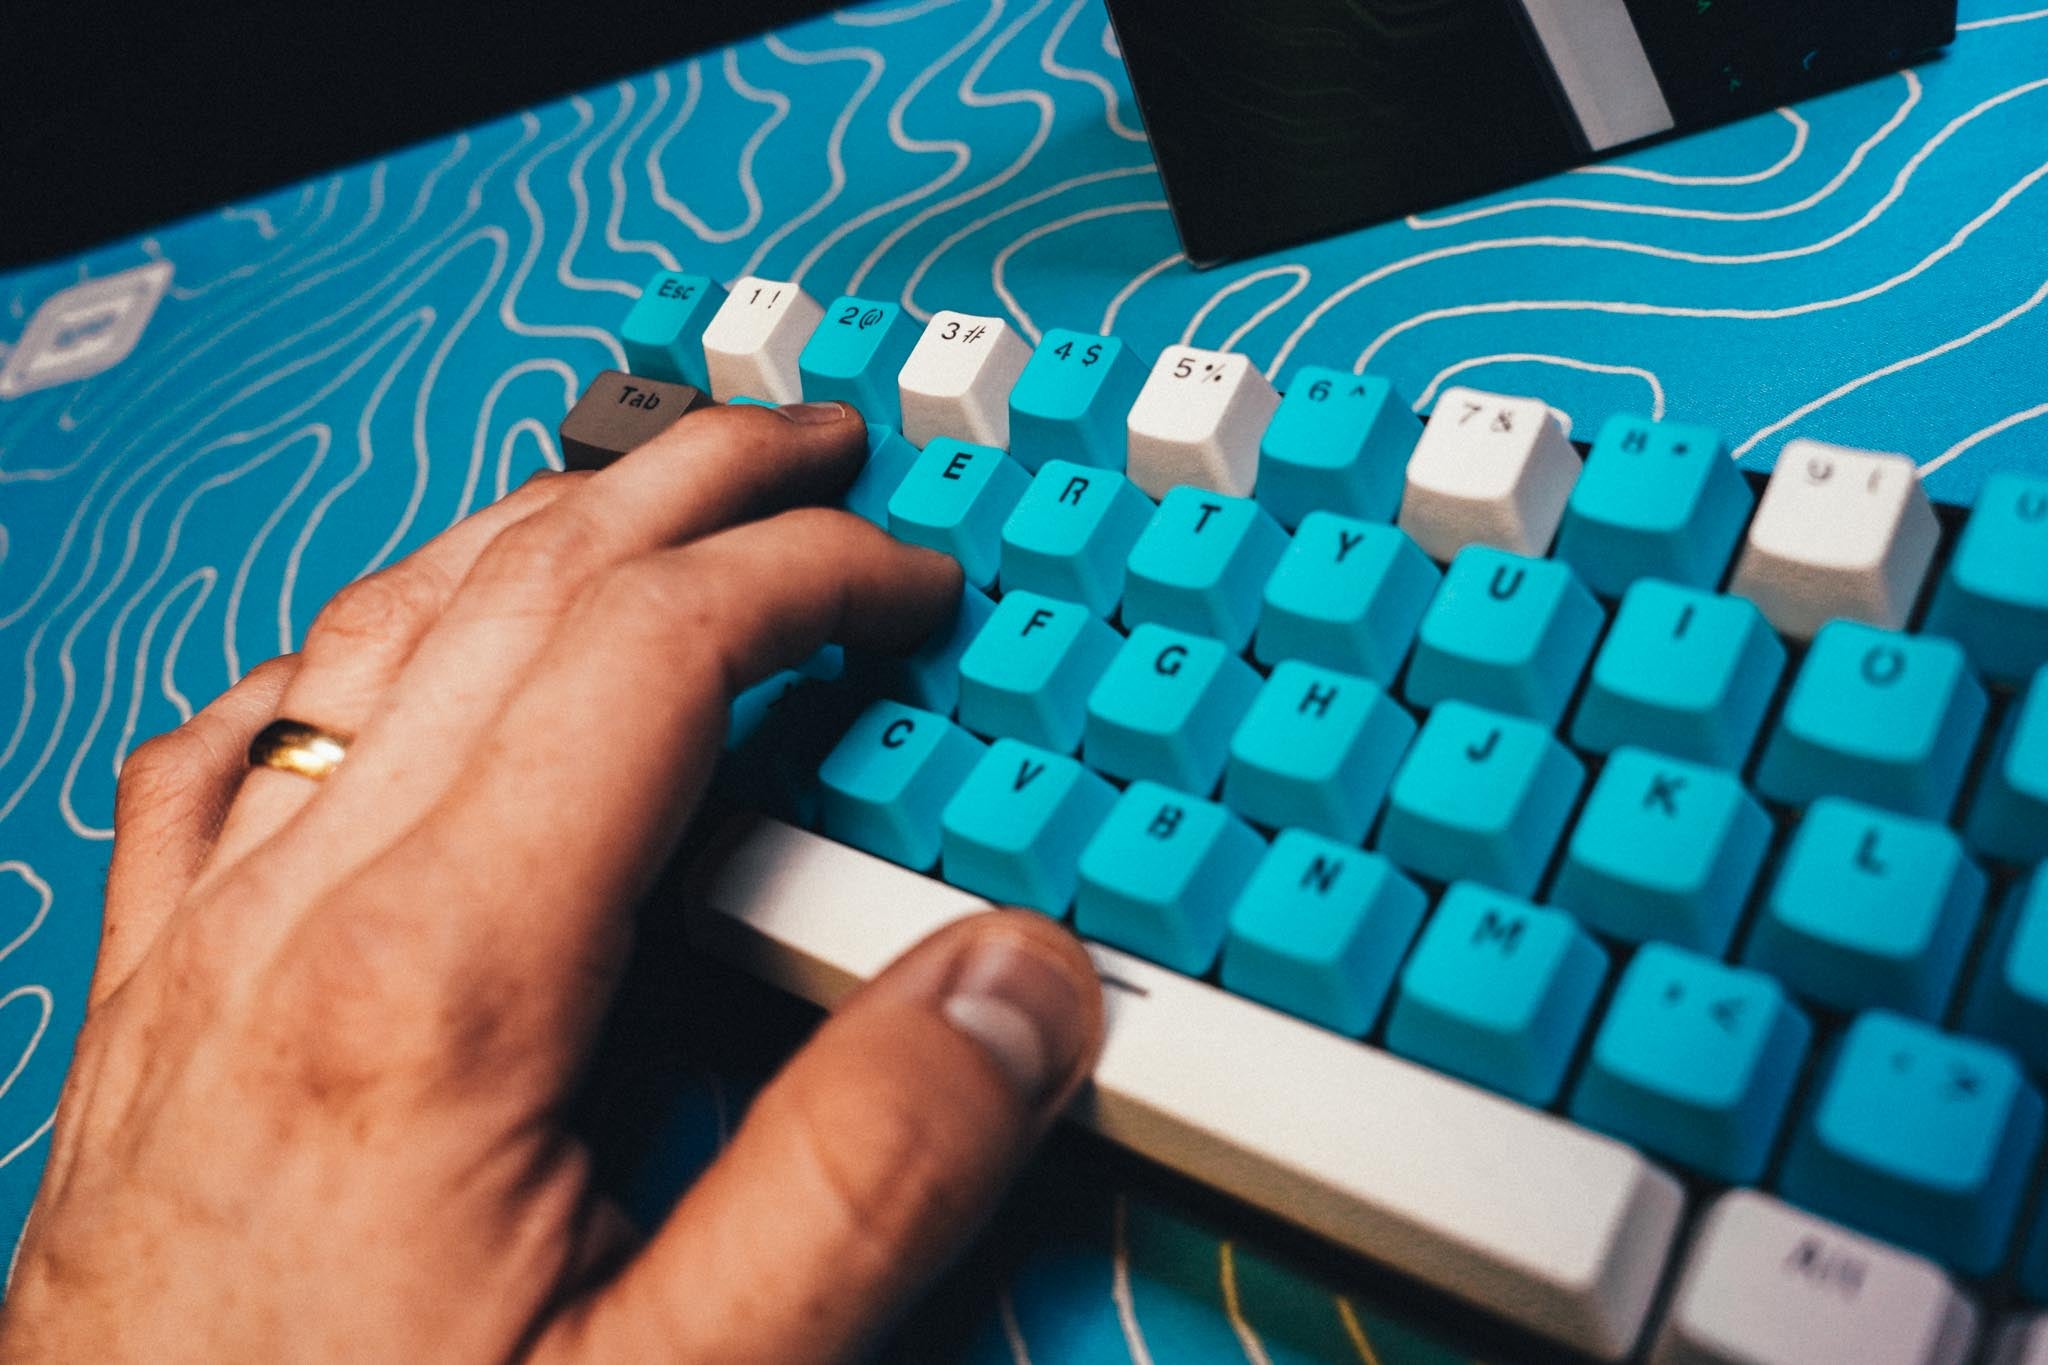 icicle - Gaming Keyboards